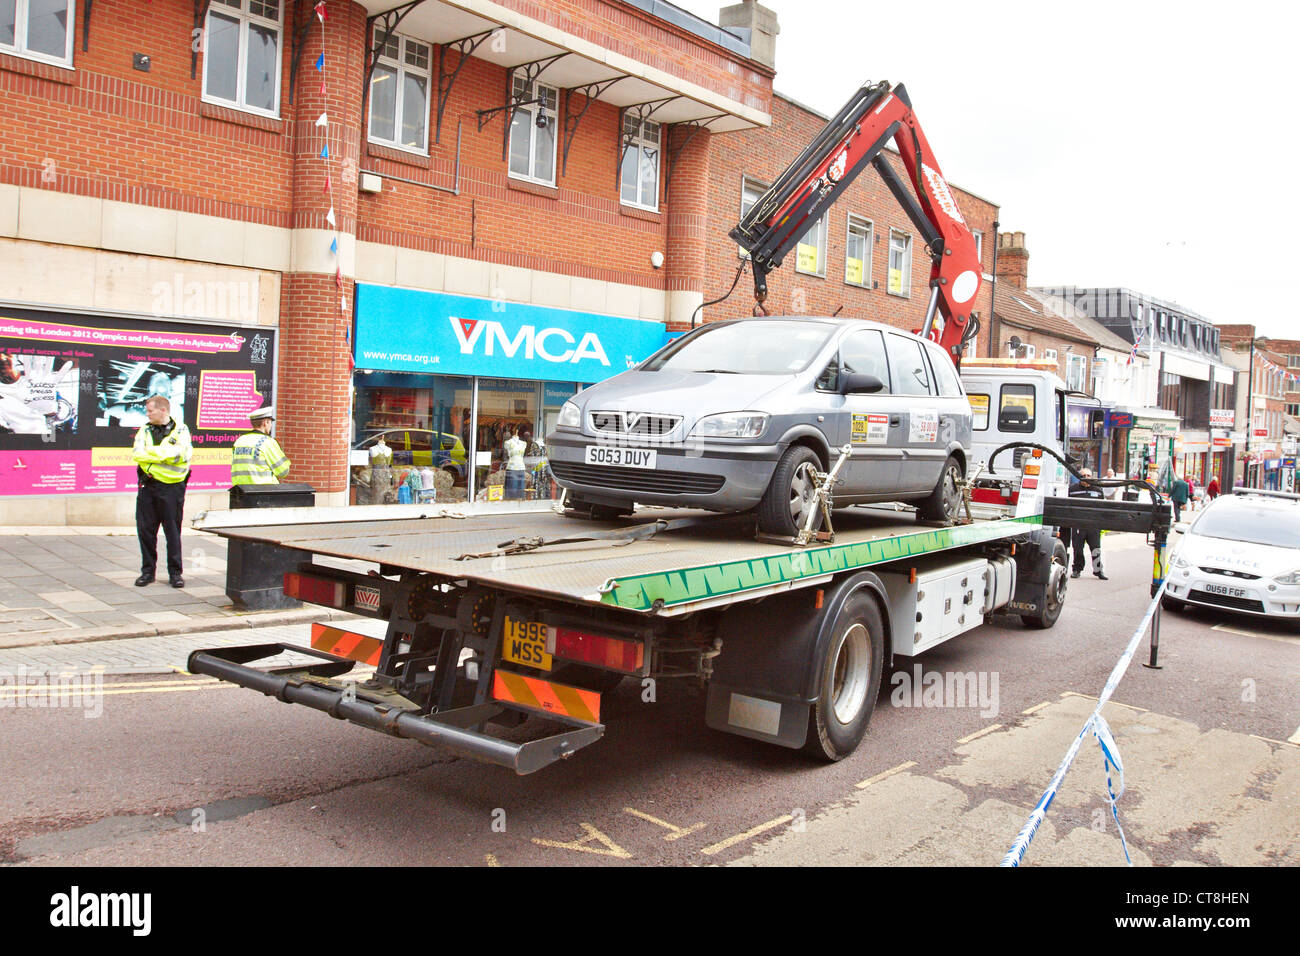 Police recover a minicab involved in a traffic accident in Aylesbury town centre Stock Photo